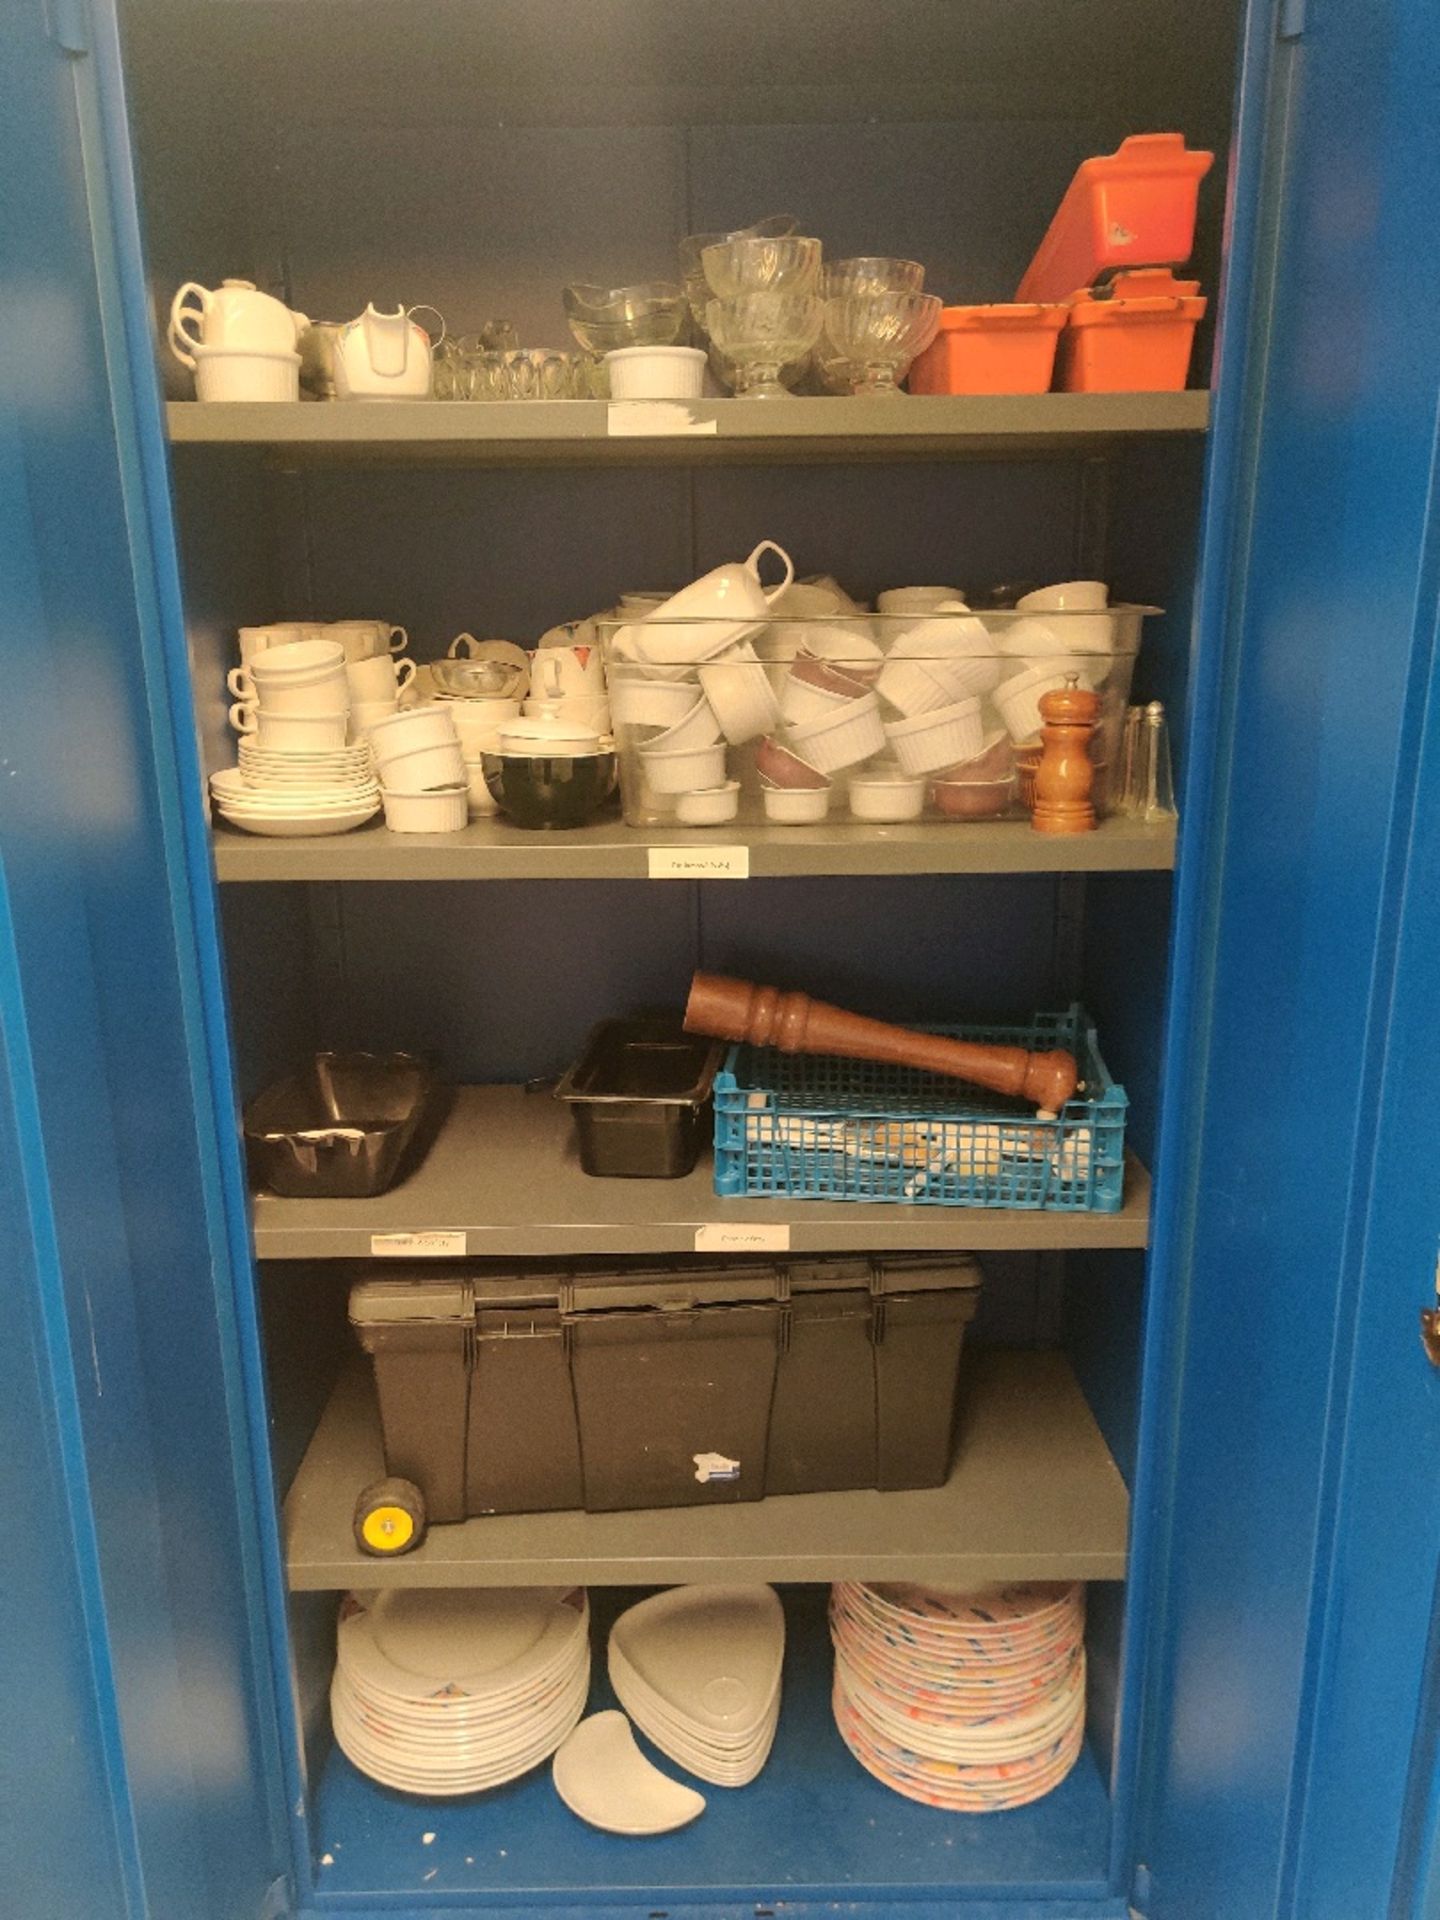 Contents of blue cupboard